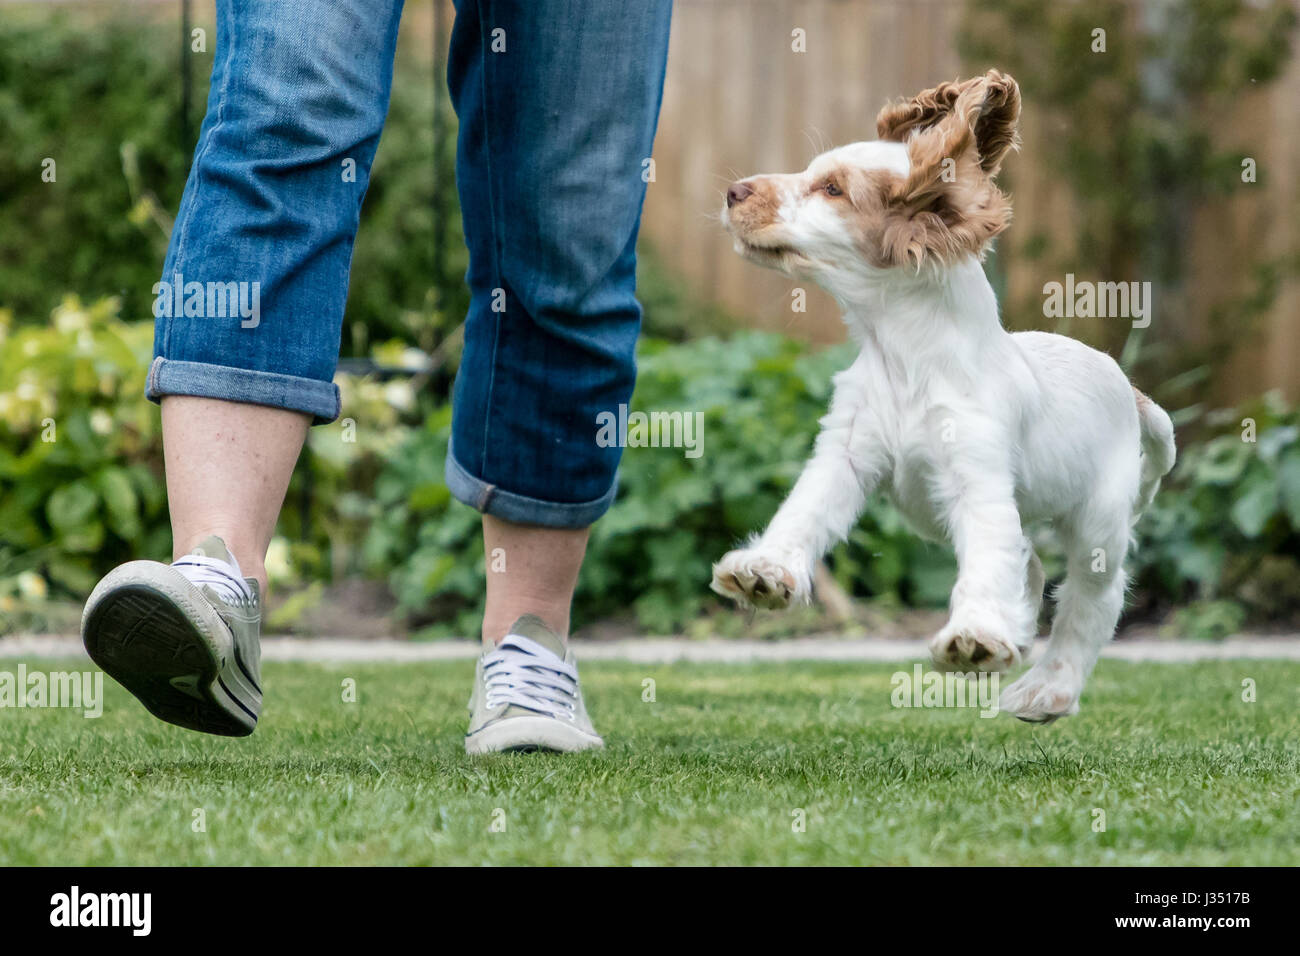 Mischievious playful cocker spaniel puppy running and jumping in garden Stock Photo